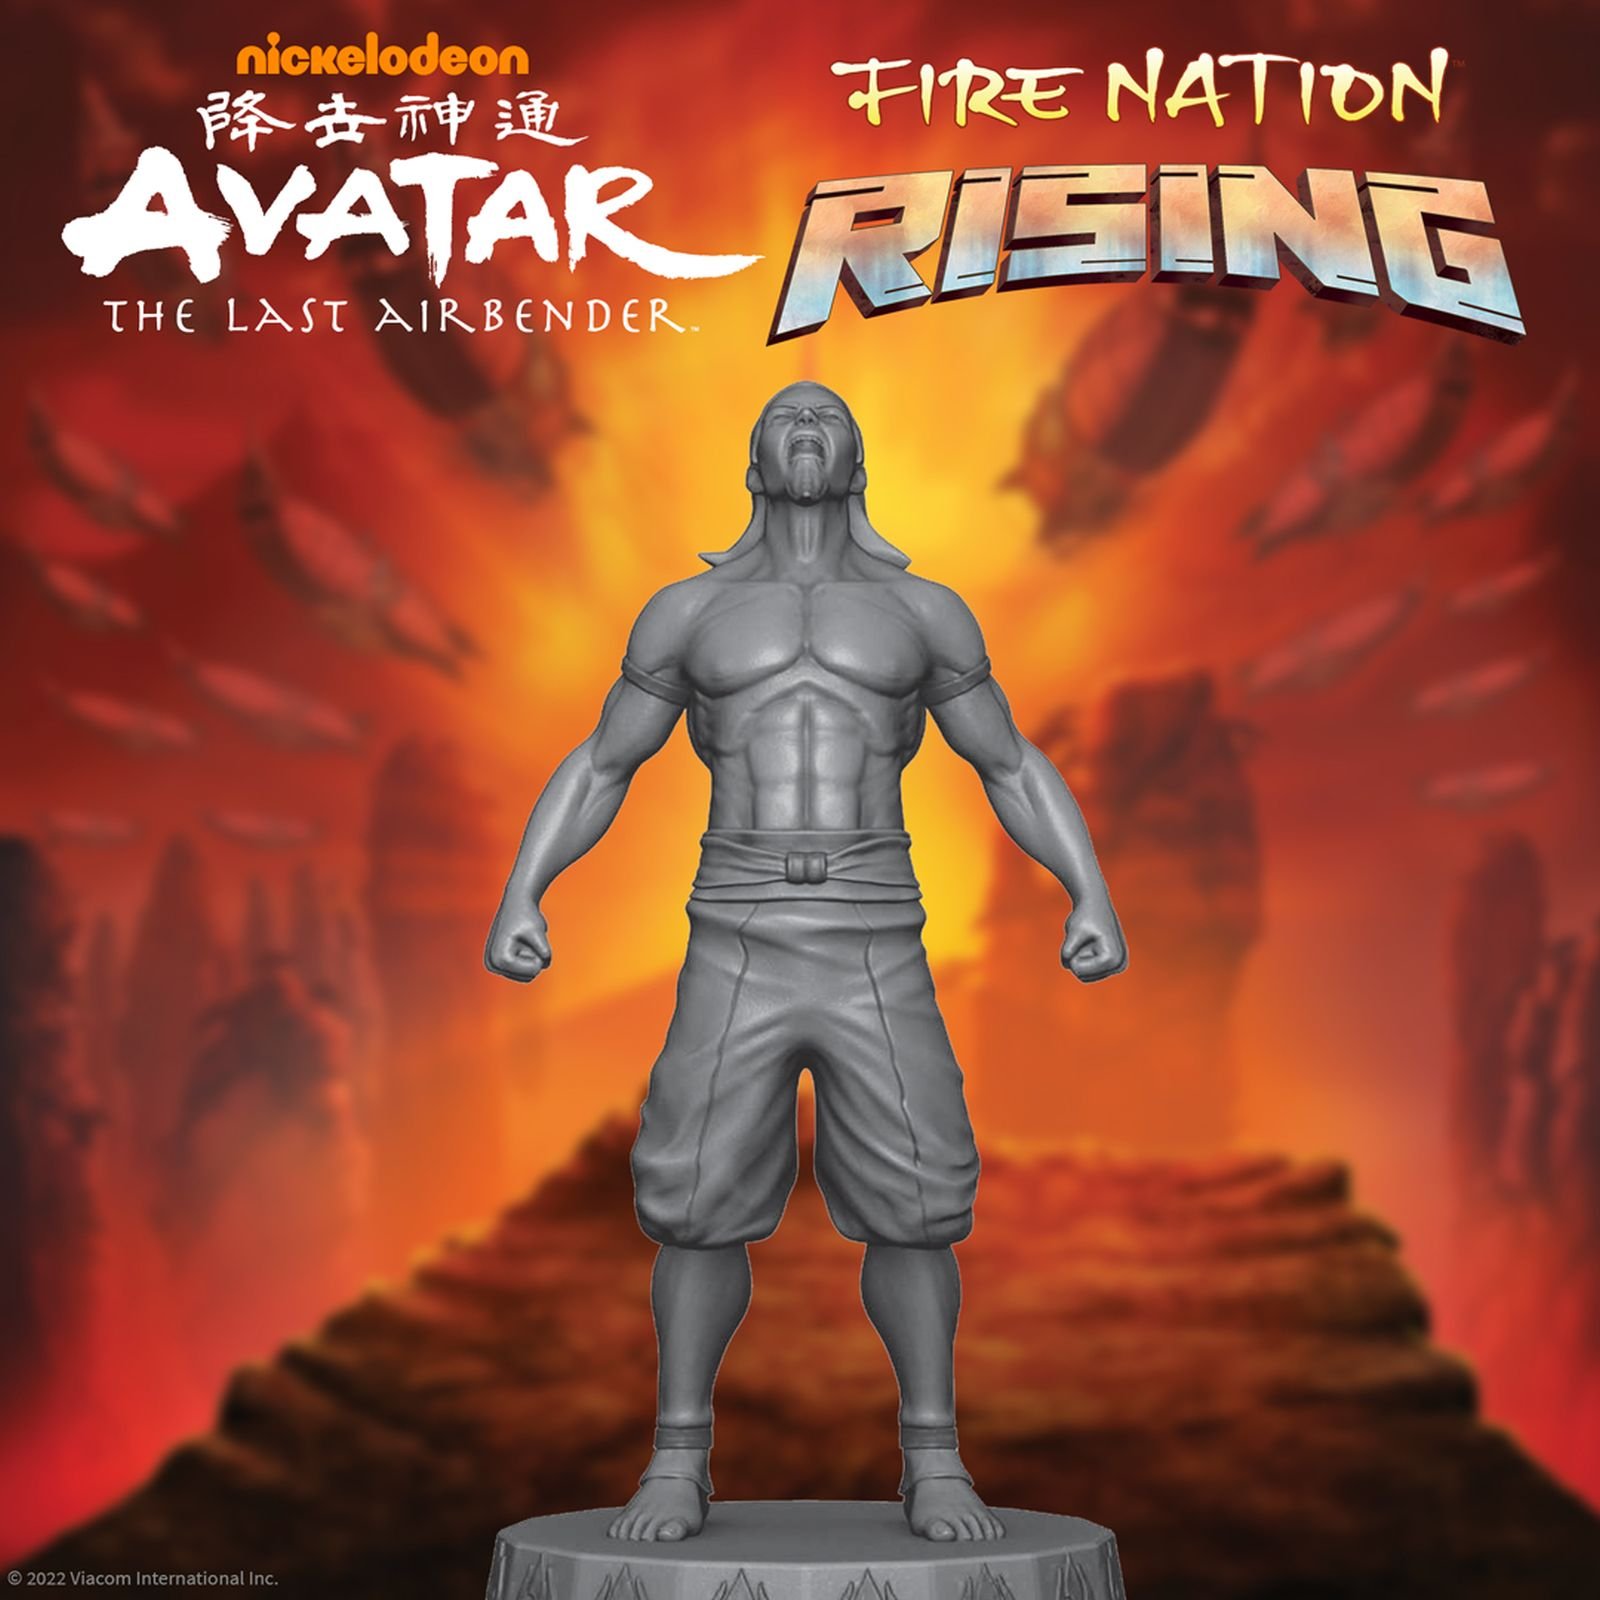 Avatar The Last Airbender Fire Nation Rising Board Game Coming From The OP   Board Game Halv